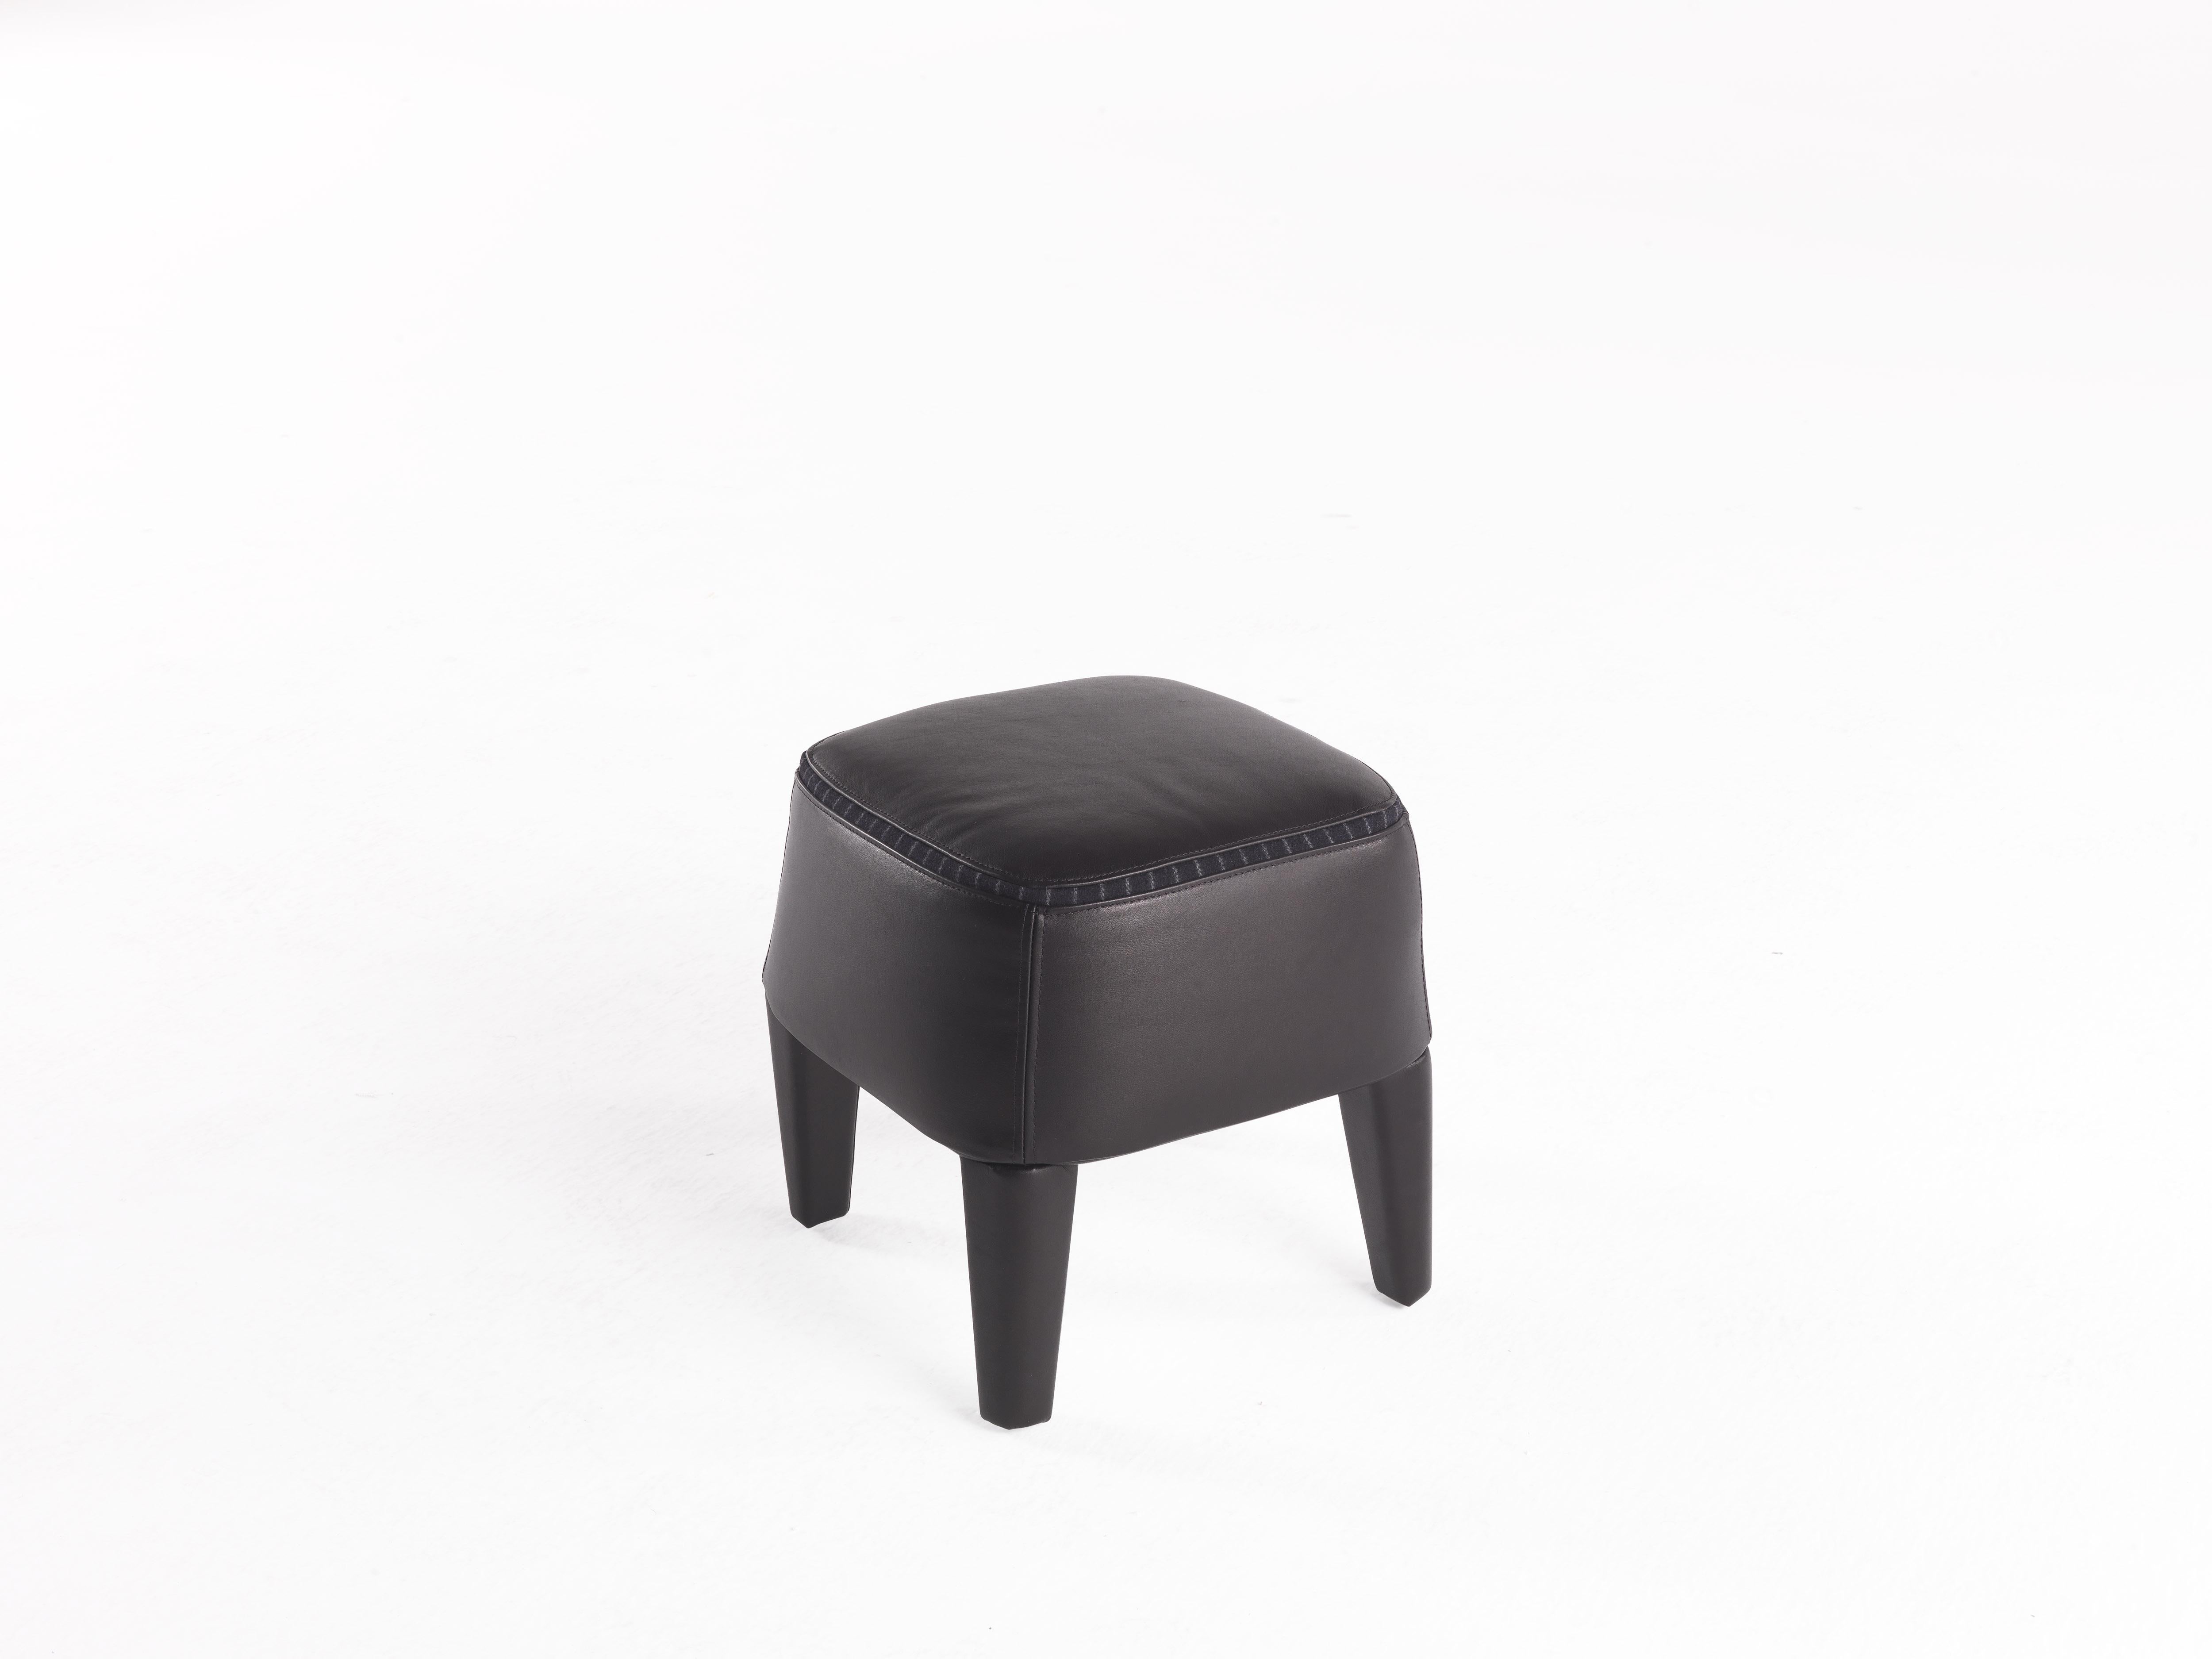 The Mini pouf features a light and versatile design. Small, soft and compact, it adds character to any setting. Available in different menswear fabrics of the collection: pied-de-poule, pinstripe, twill, Prince of Wales.
Mini pouf with a structure